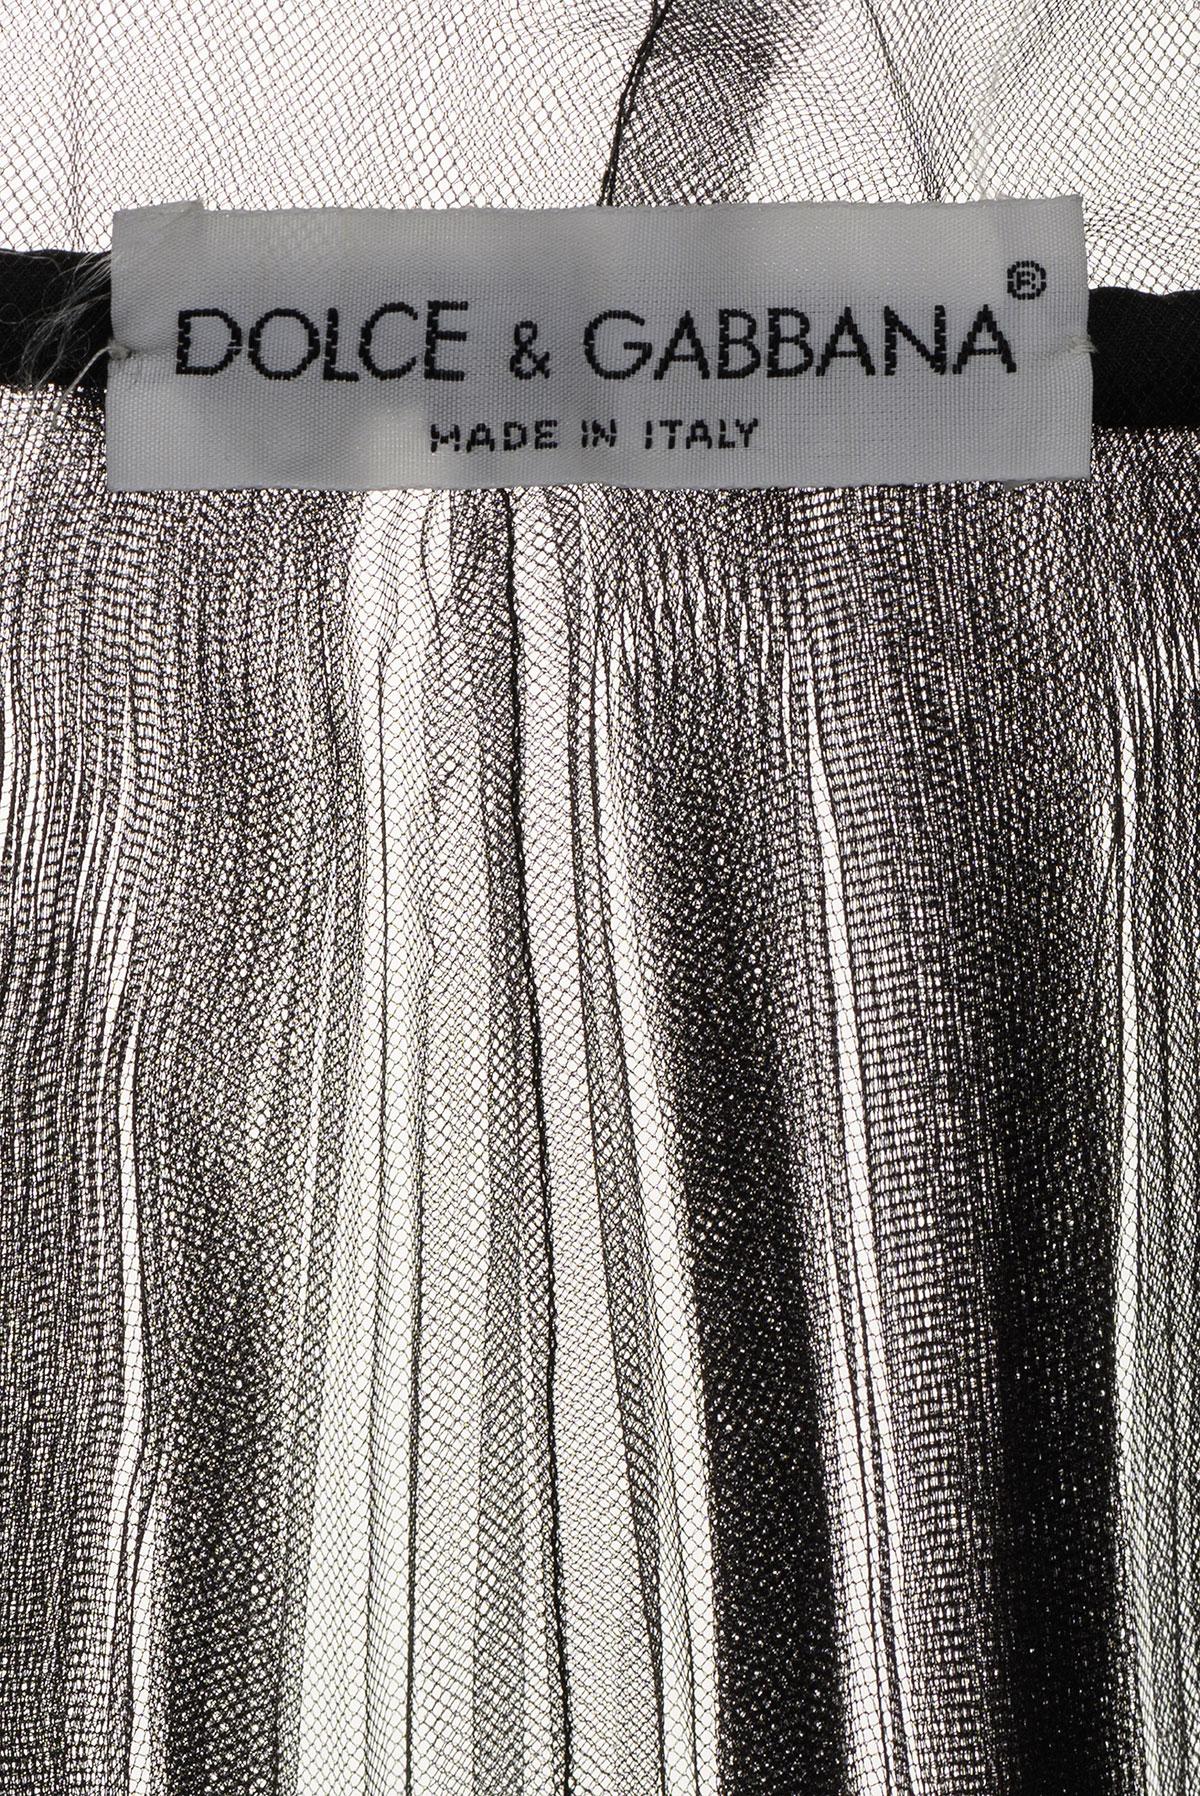 DOLCE & GABBANA SS 92 Rare and Iconic Tulle Minidress 1